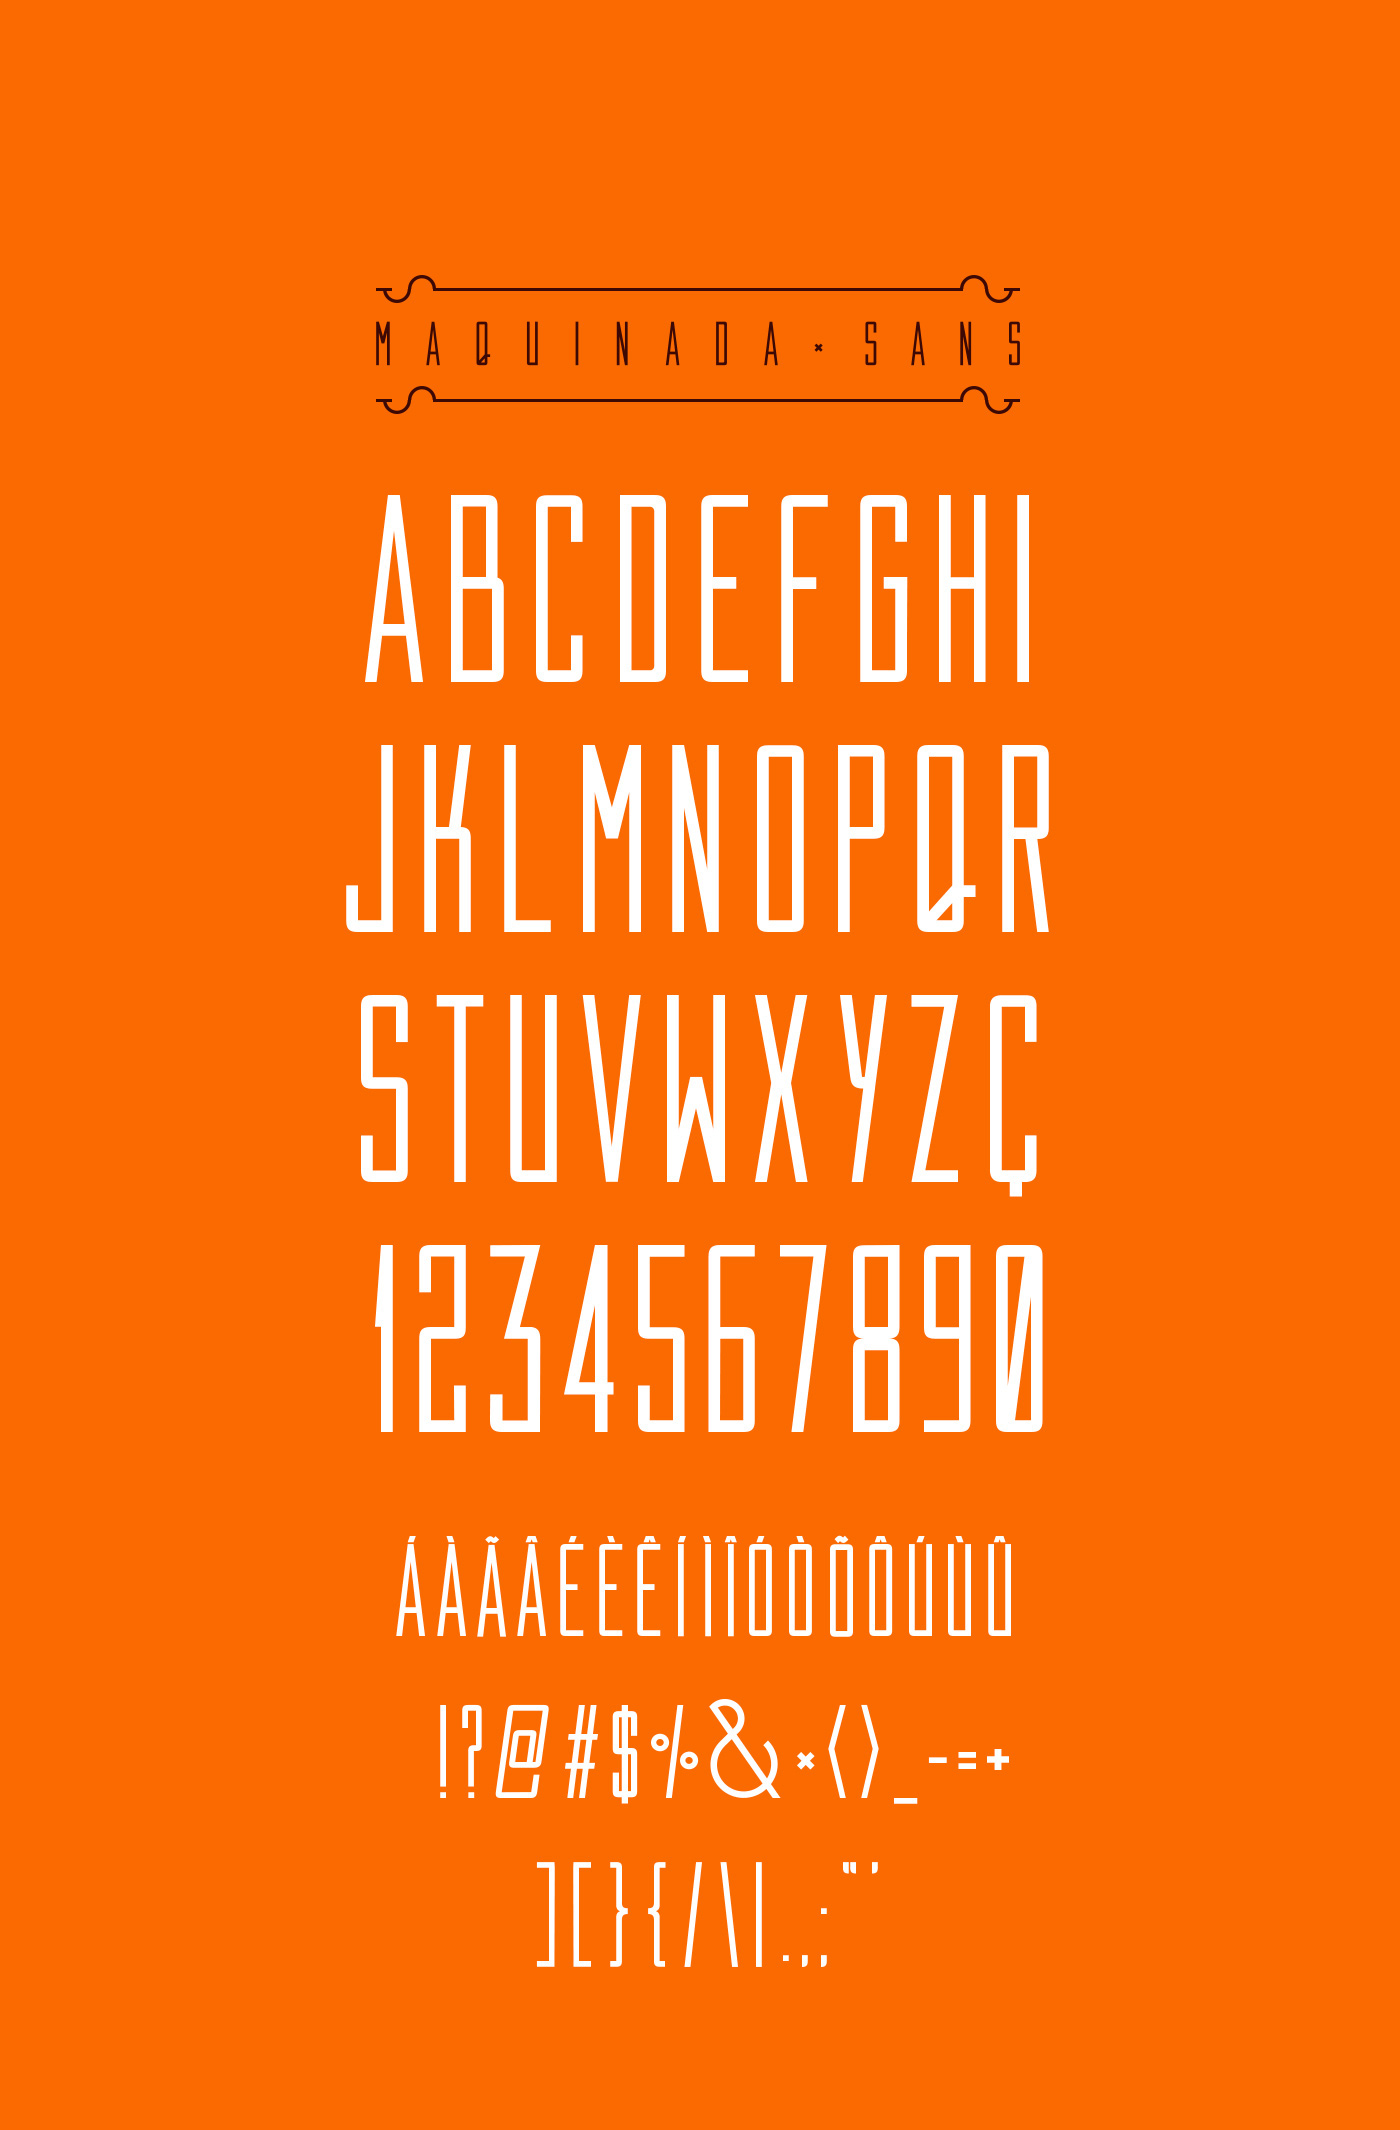 type Tipos letras all caps maquinada sans serif free type free font Typeface